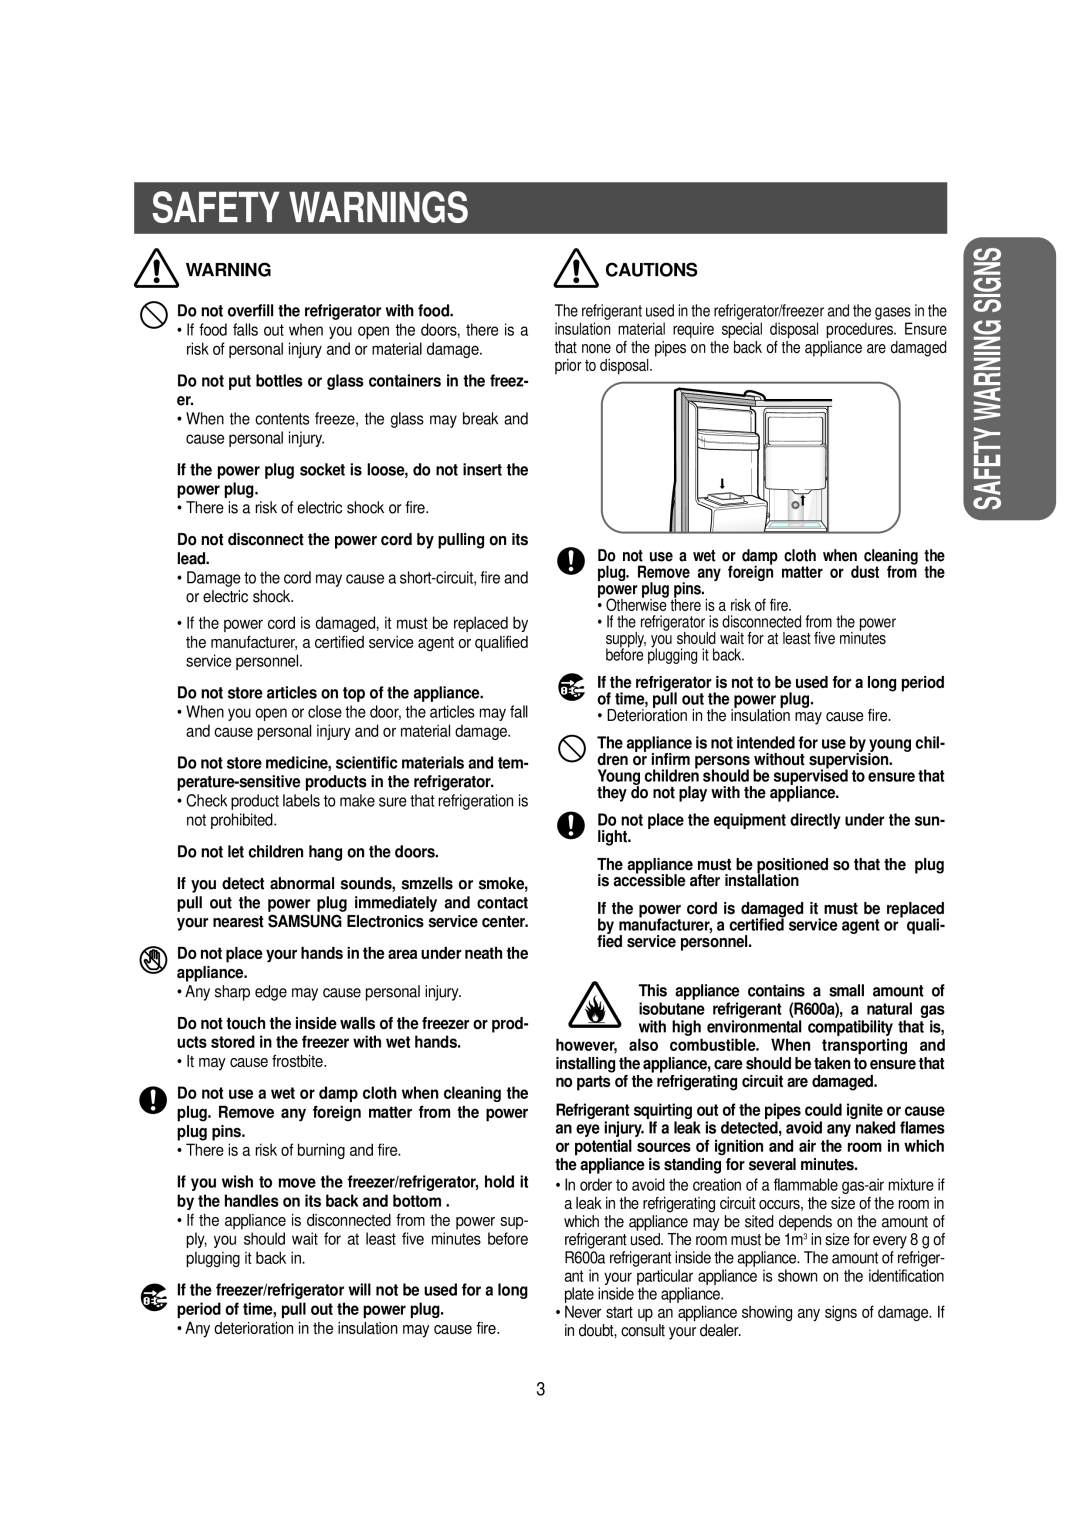 Samsung SRS536NP owner manual Safety Warning Signs, Cautions, Safety Warnings 